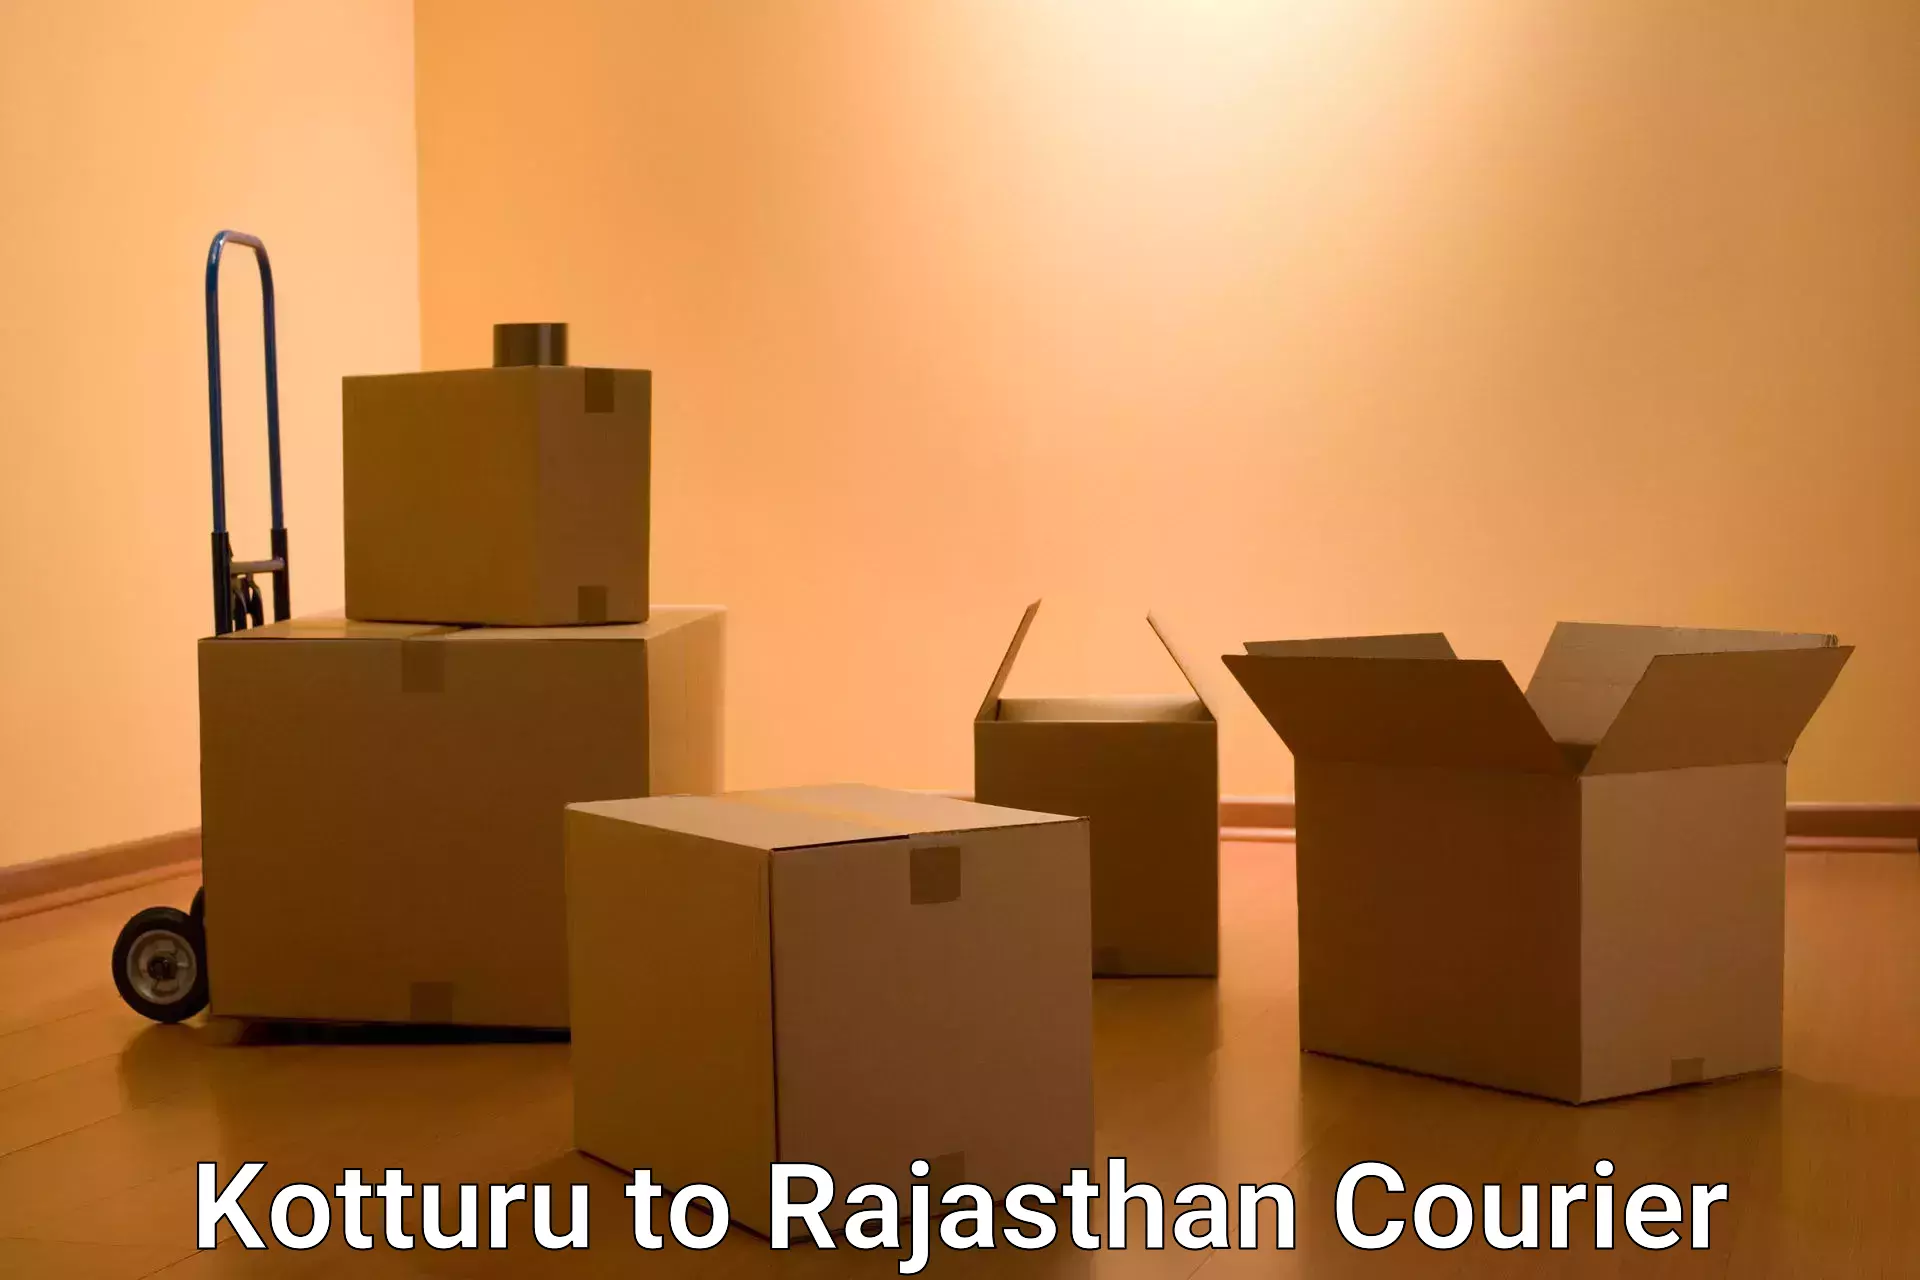 On-call courier service Kotturu to Rajasthan